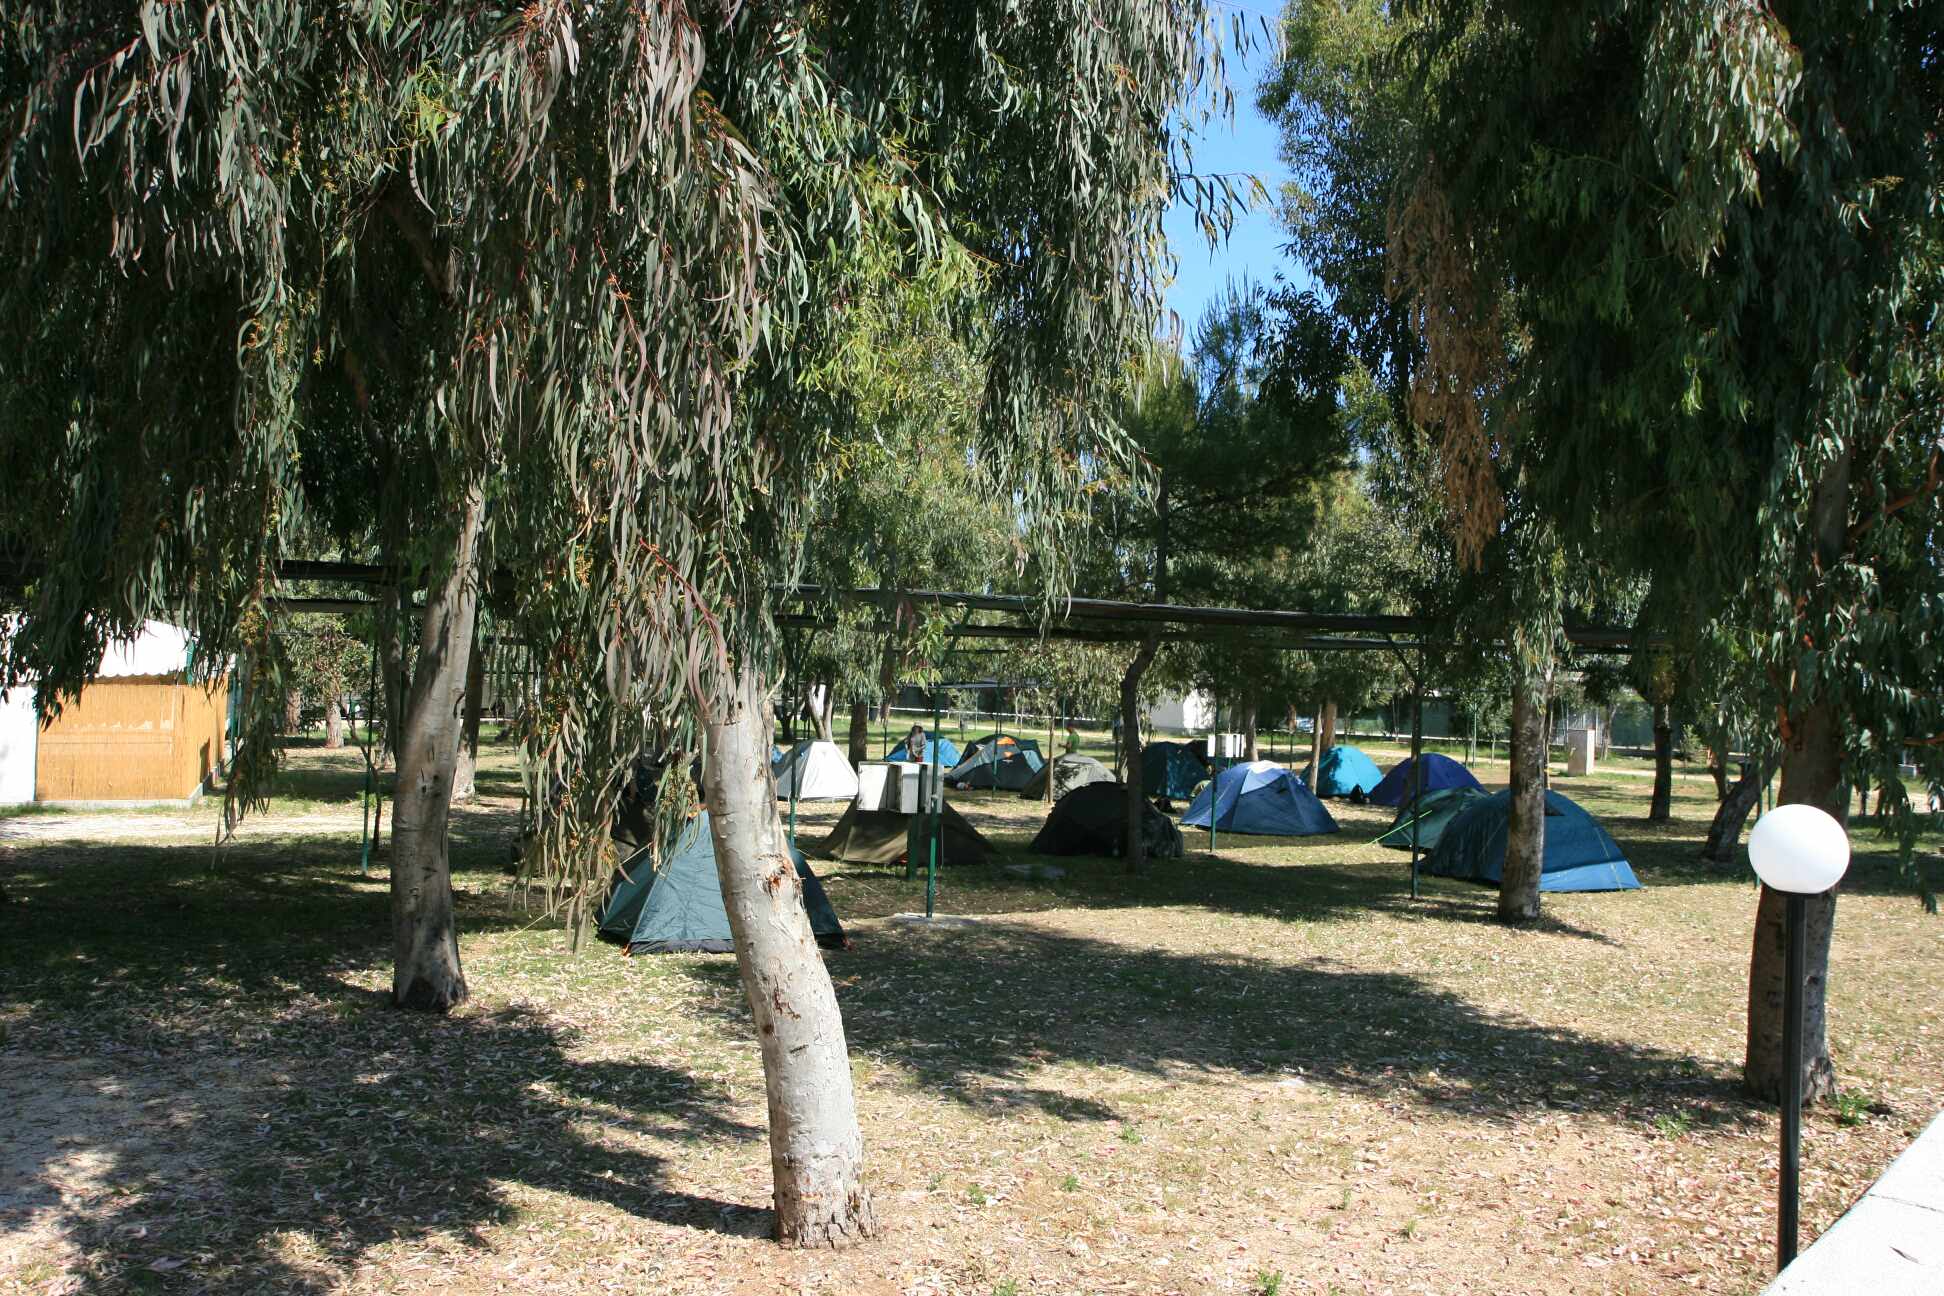 The camp